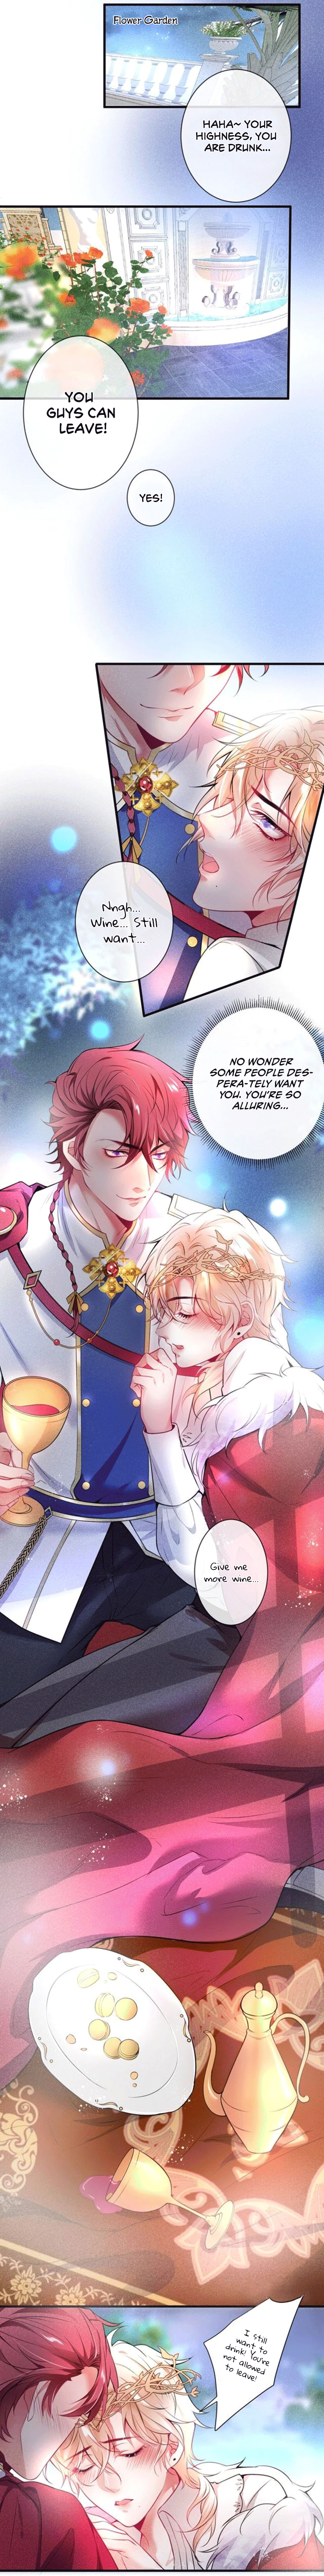 The Prince And His Mischievous One Ch. 2 Who gave you the authority?!